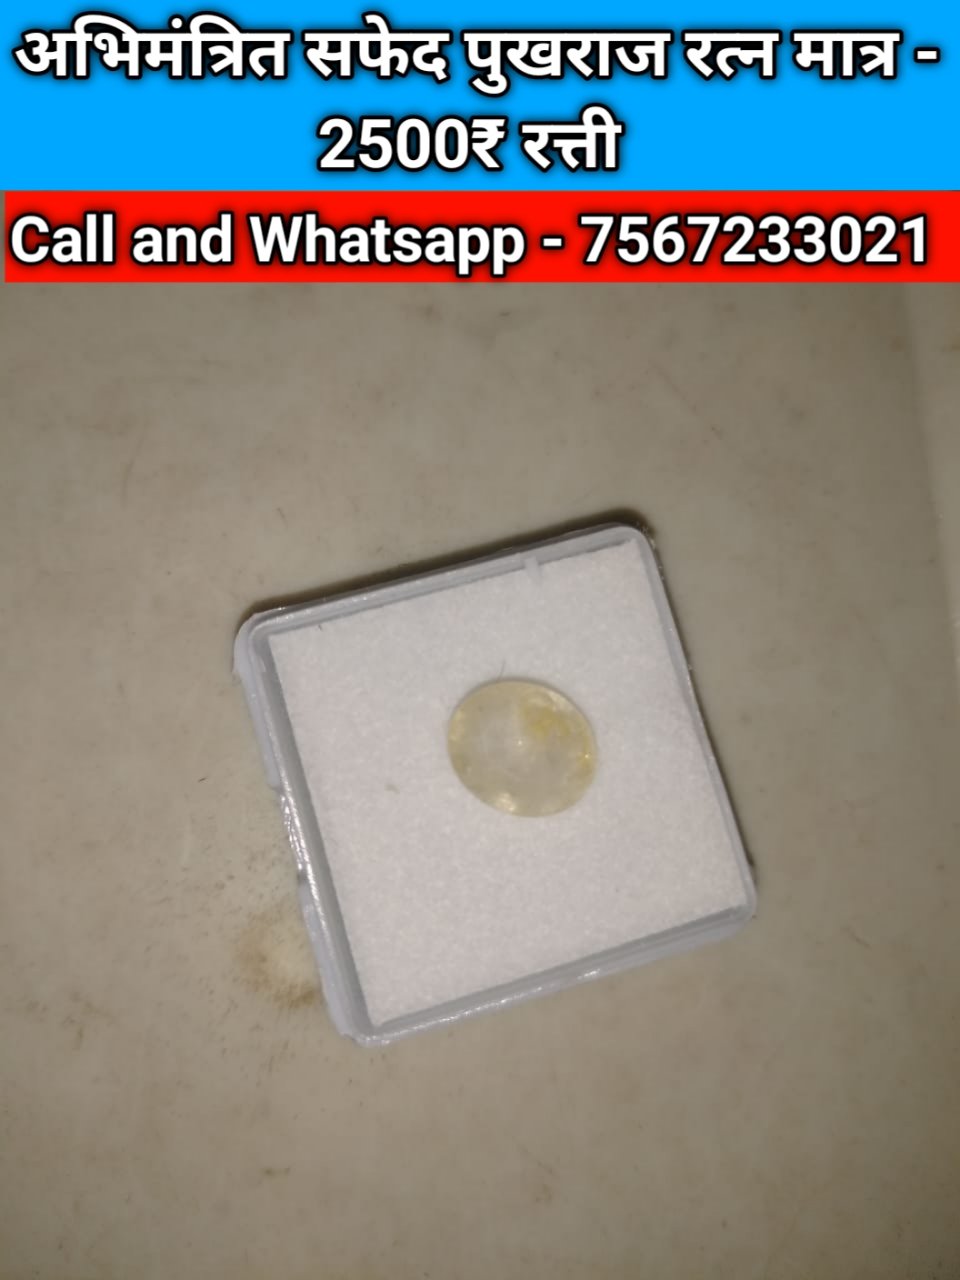 benefits of white sapphire in hindi, safed pukhraj ka upratna, safed pukhraj kab pehne, safed pukhraj ke fayde, safed pukhraj ke labh, safed pukhraj ke nuksan, safed pukhraj pahnane ke fayde, white sapphire benefits in hindi, White Sapphire In Hindi, white sapphire meaning in hindi, white sapphire ratna in hindi, white sapphire stone benefits in hindi, white sapphire stone in hindi, white sapphire stone meaning in hindi, सफेद पुखराज, सफेद पुखराज का उपरत्न, सफेद पुखराज की कीमत, सफेद पुखराज की कीमत क्या है, सफेद पुखराज की पहचान, सफेद पुखराज की विशेषता, सफेद पुखराज के नुकसान, सफेद पुखराज के फायदे, सफेद पुखराज के लाभ